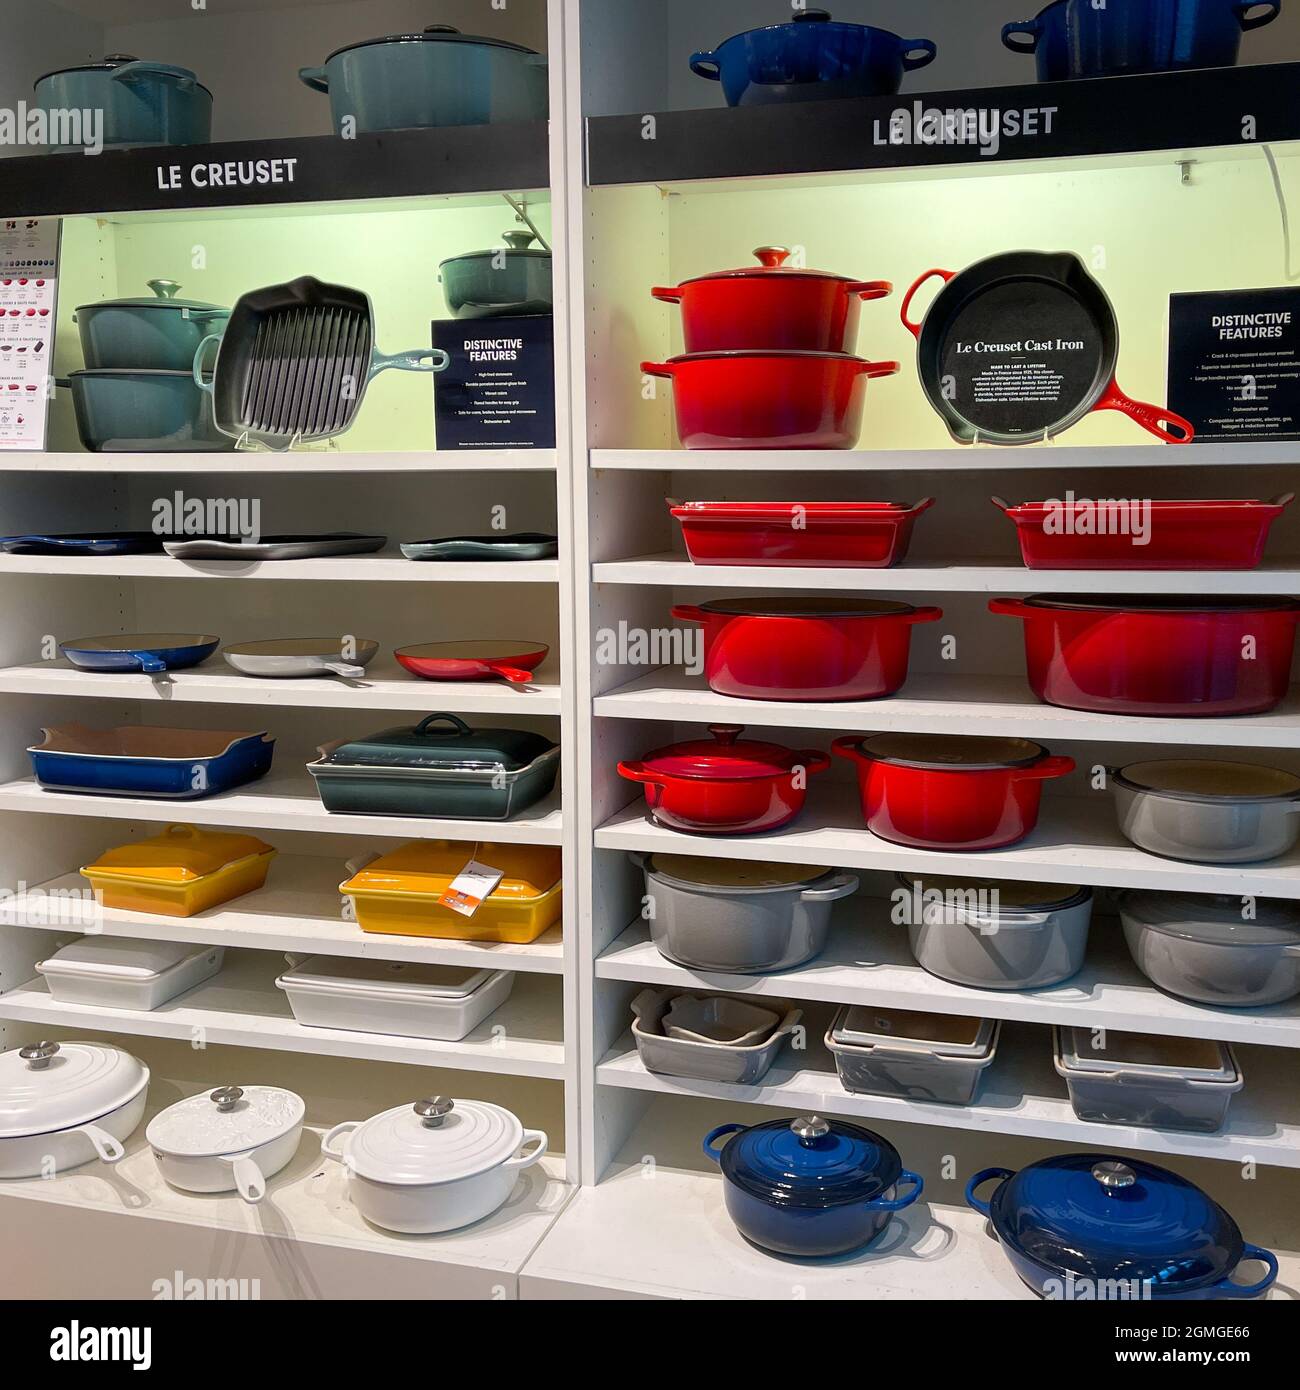 https://c8.alamy.com/comp/2GMGE66/orlando-fl-usa-september-9-2021-the-le-creuset-pot-and-pan-aisle-at-a-williams-sonoma-store-at-an-indoor-mall-in-orlando-florida-2GMGE66.jpg